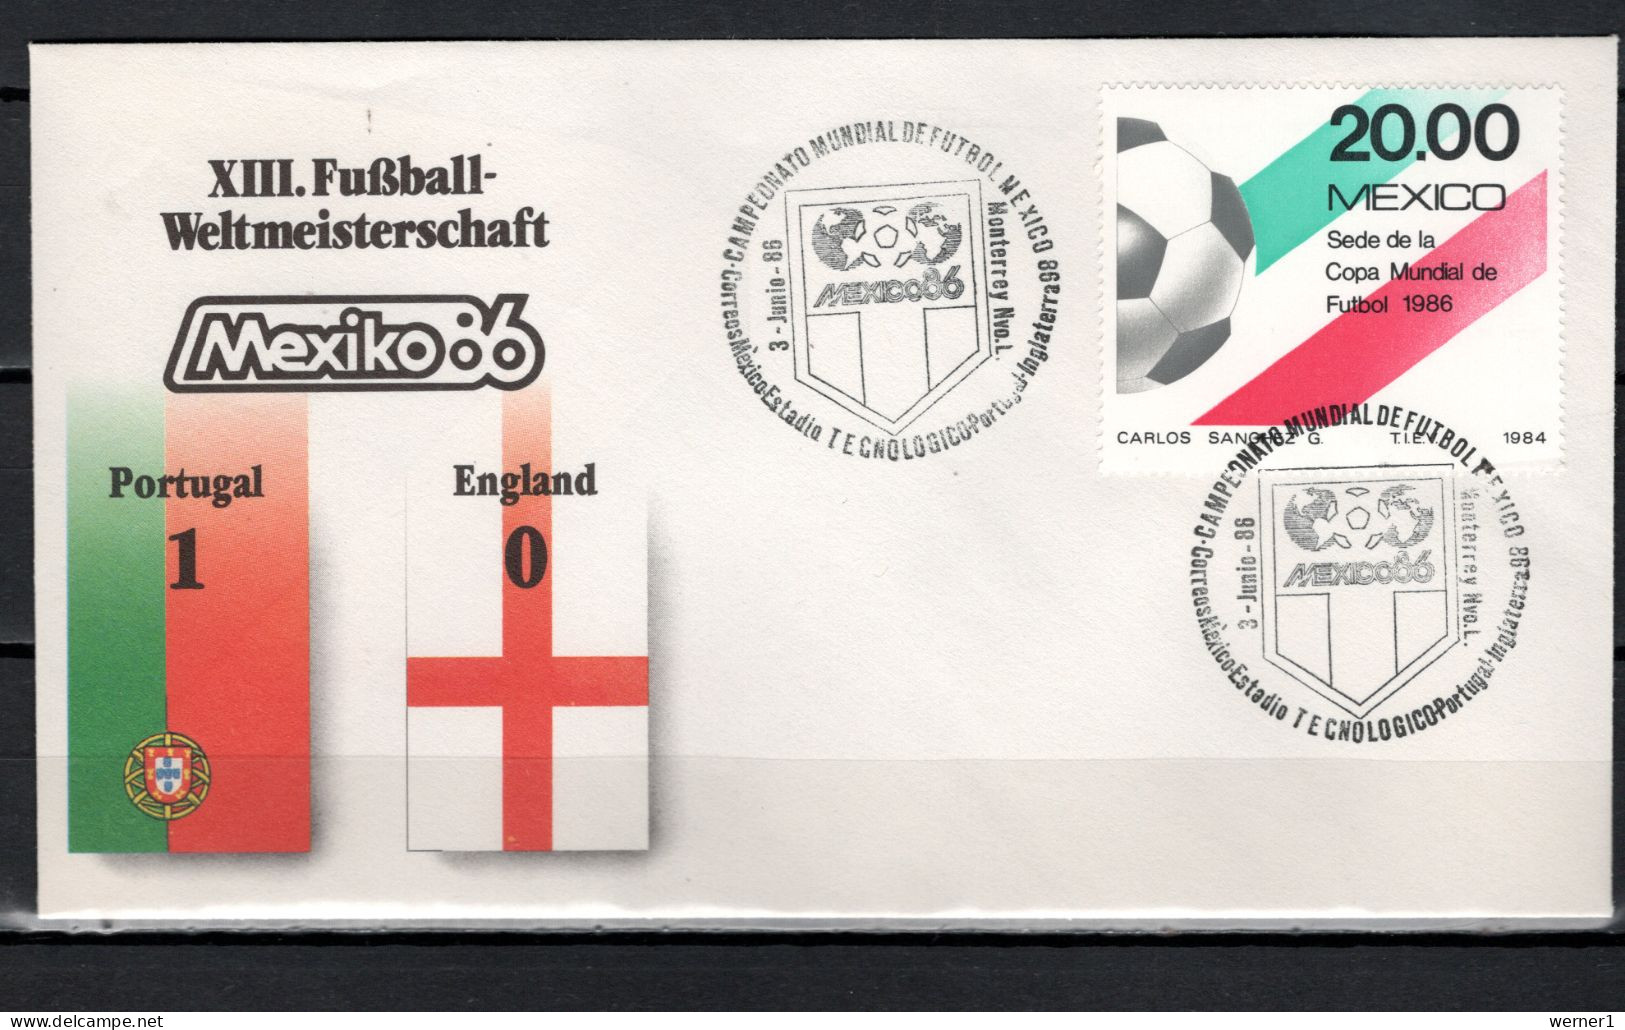 Mexico 1986 Football Soccer World Cup Commemorative Cover Match Portugal - England 1 : 0 - 1986 – Mexique